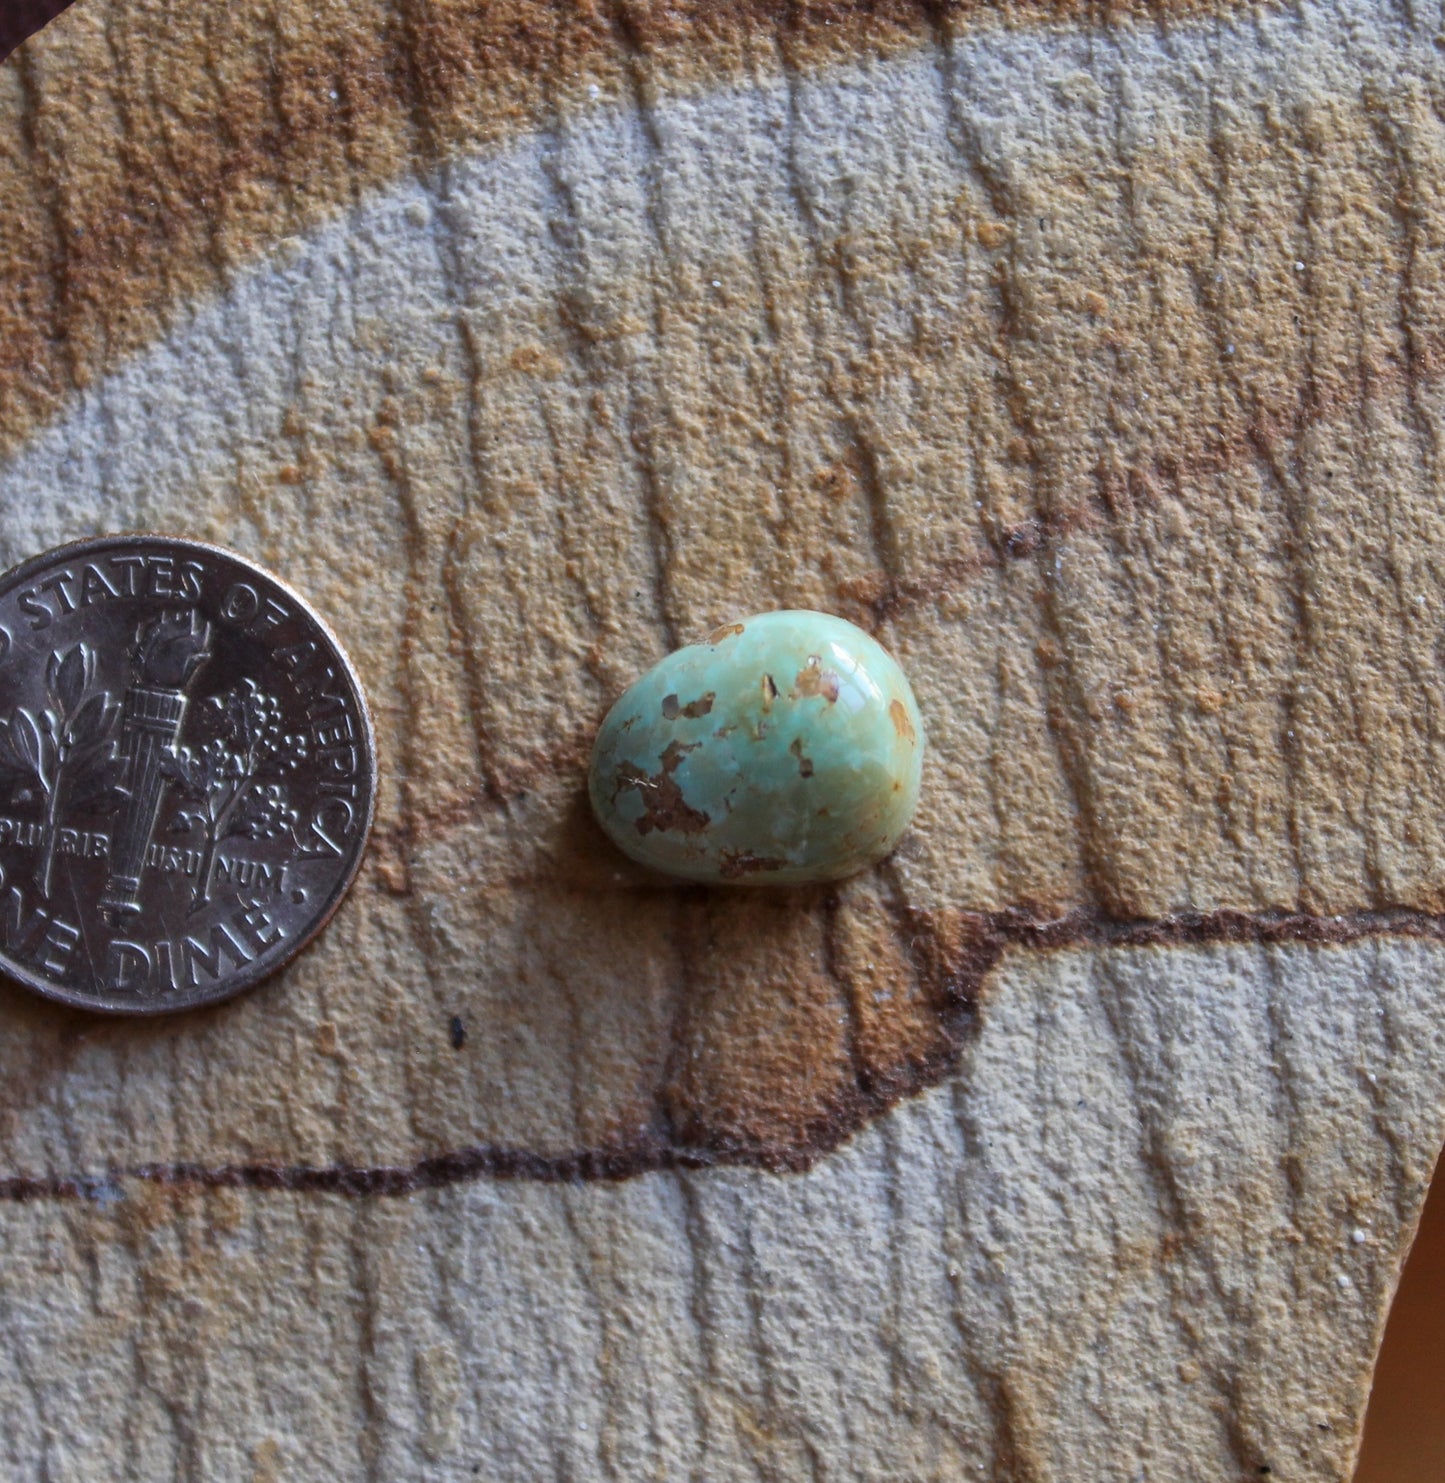 5 carat pale blue Stone Mountain Turquoise cabochon with a high dome